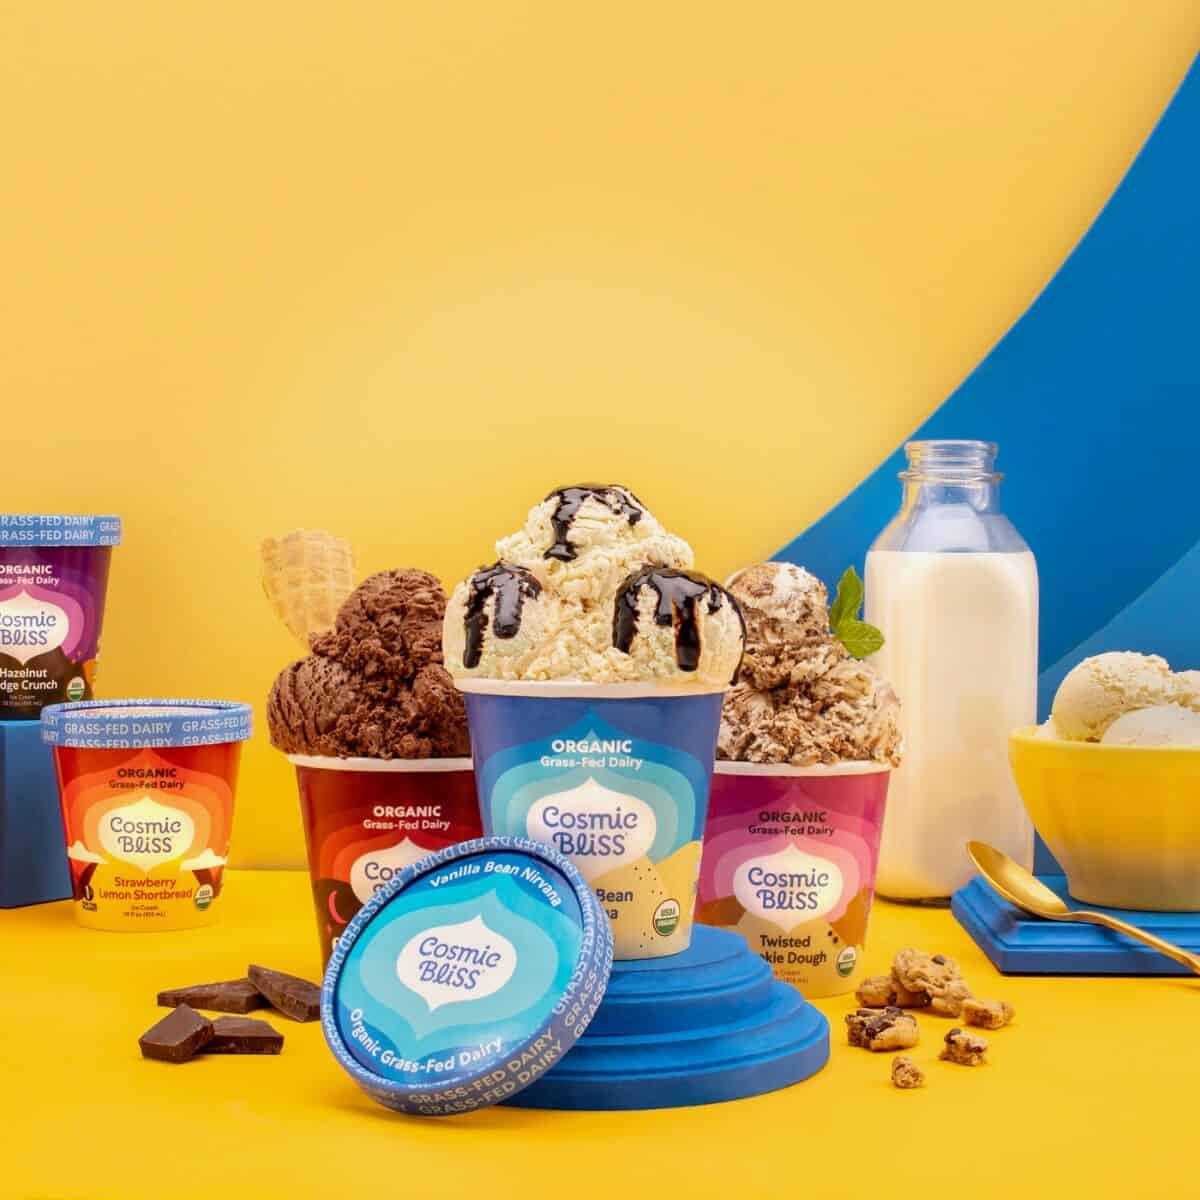 Lineup of Cosmic Bliss ice cream in their tubs with milk on a yellow and blue background.